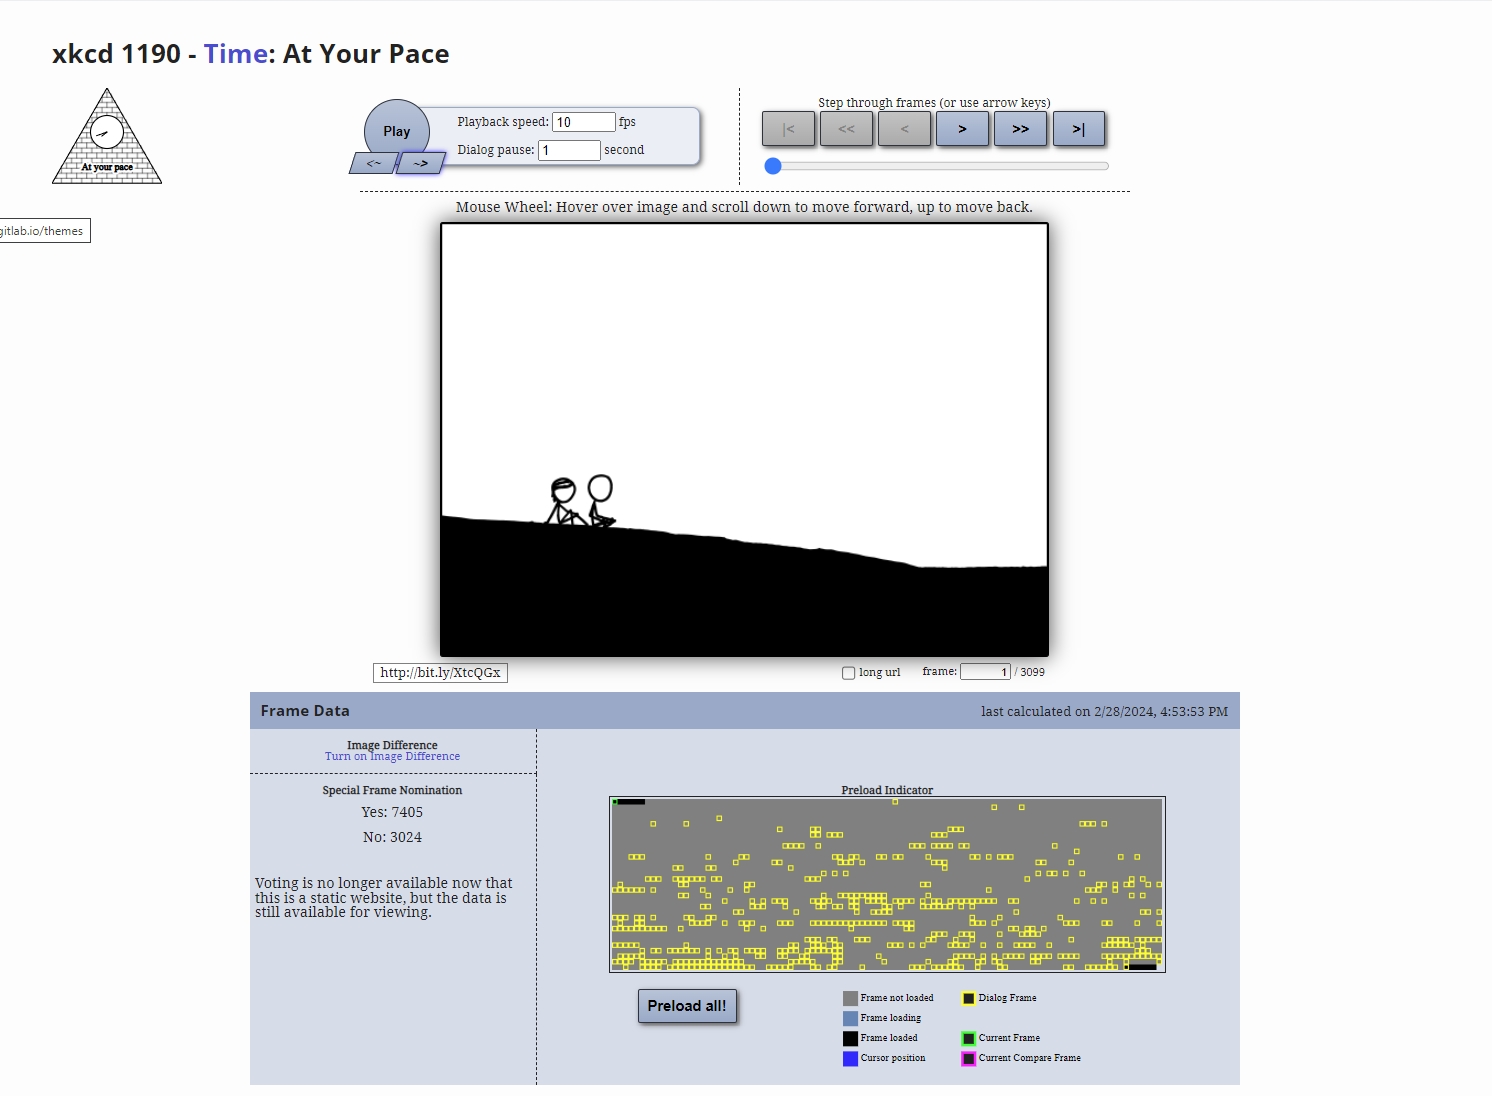 xkcd Time: At Your Pace screenshot